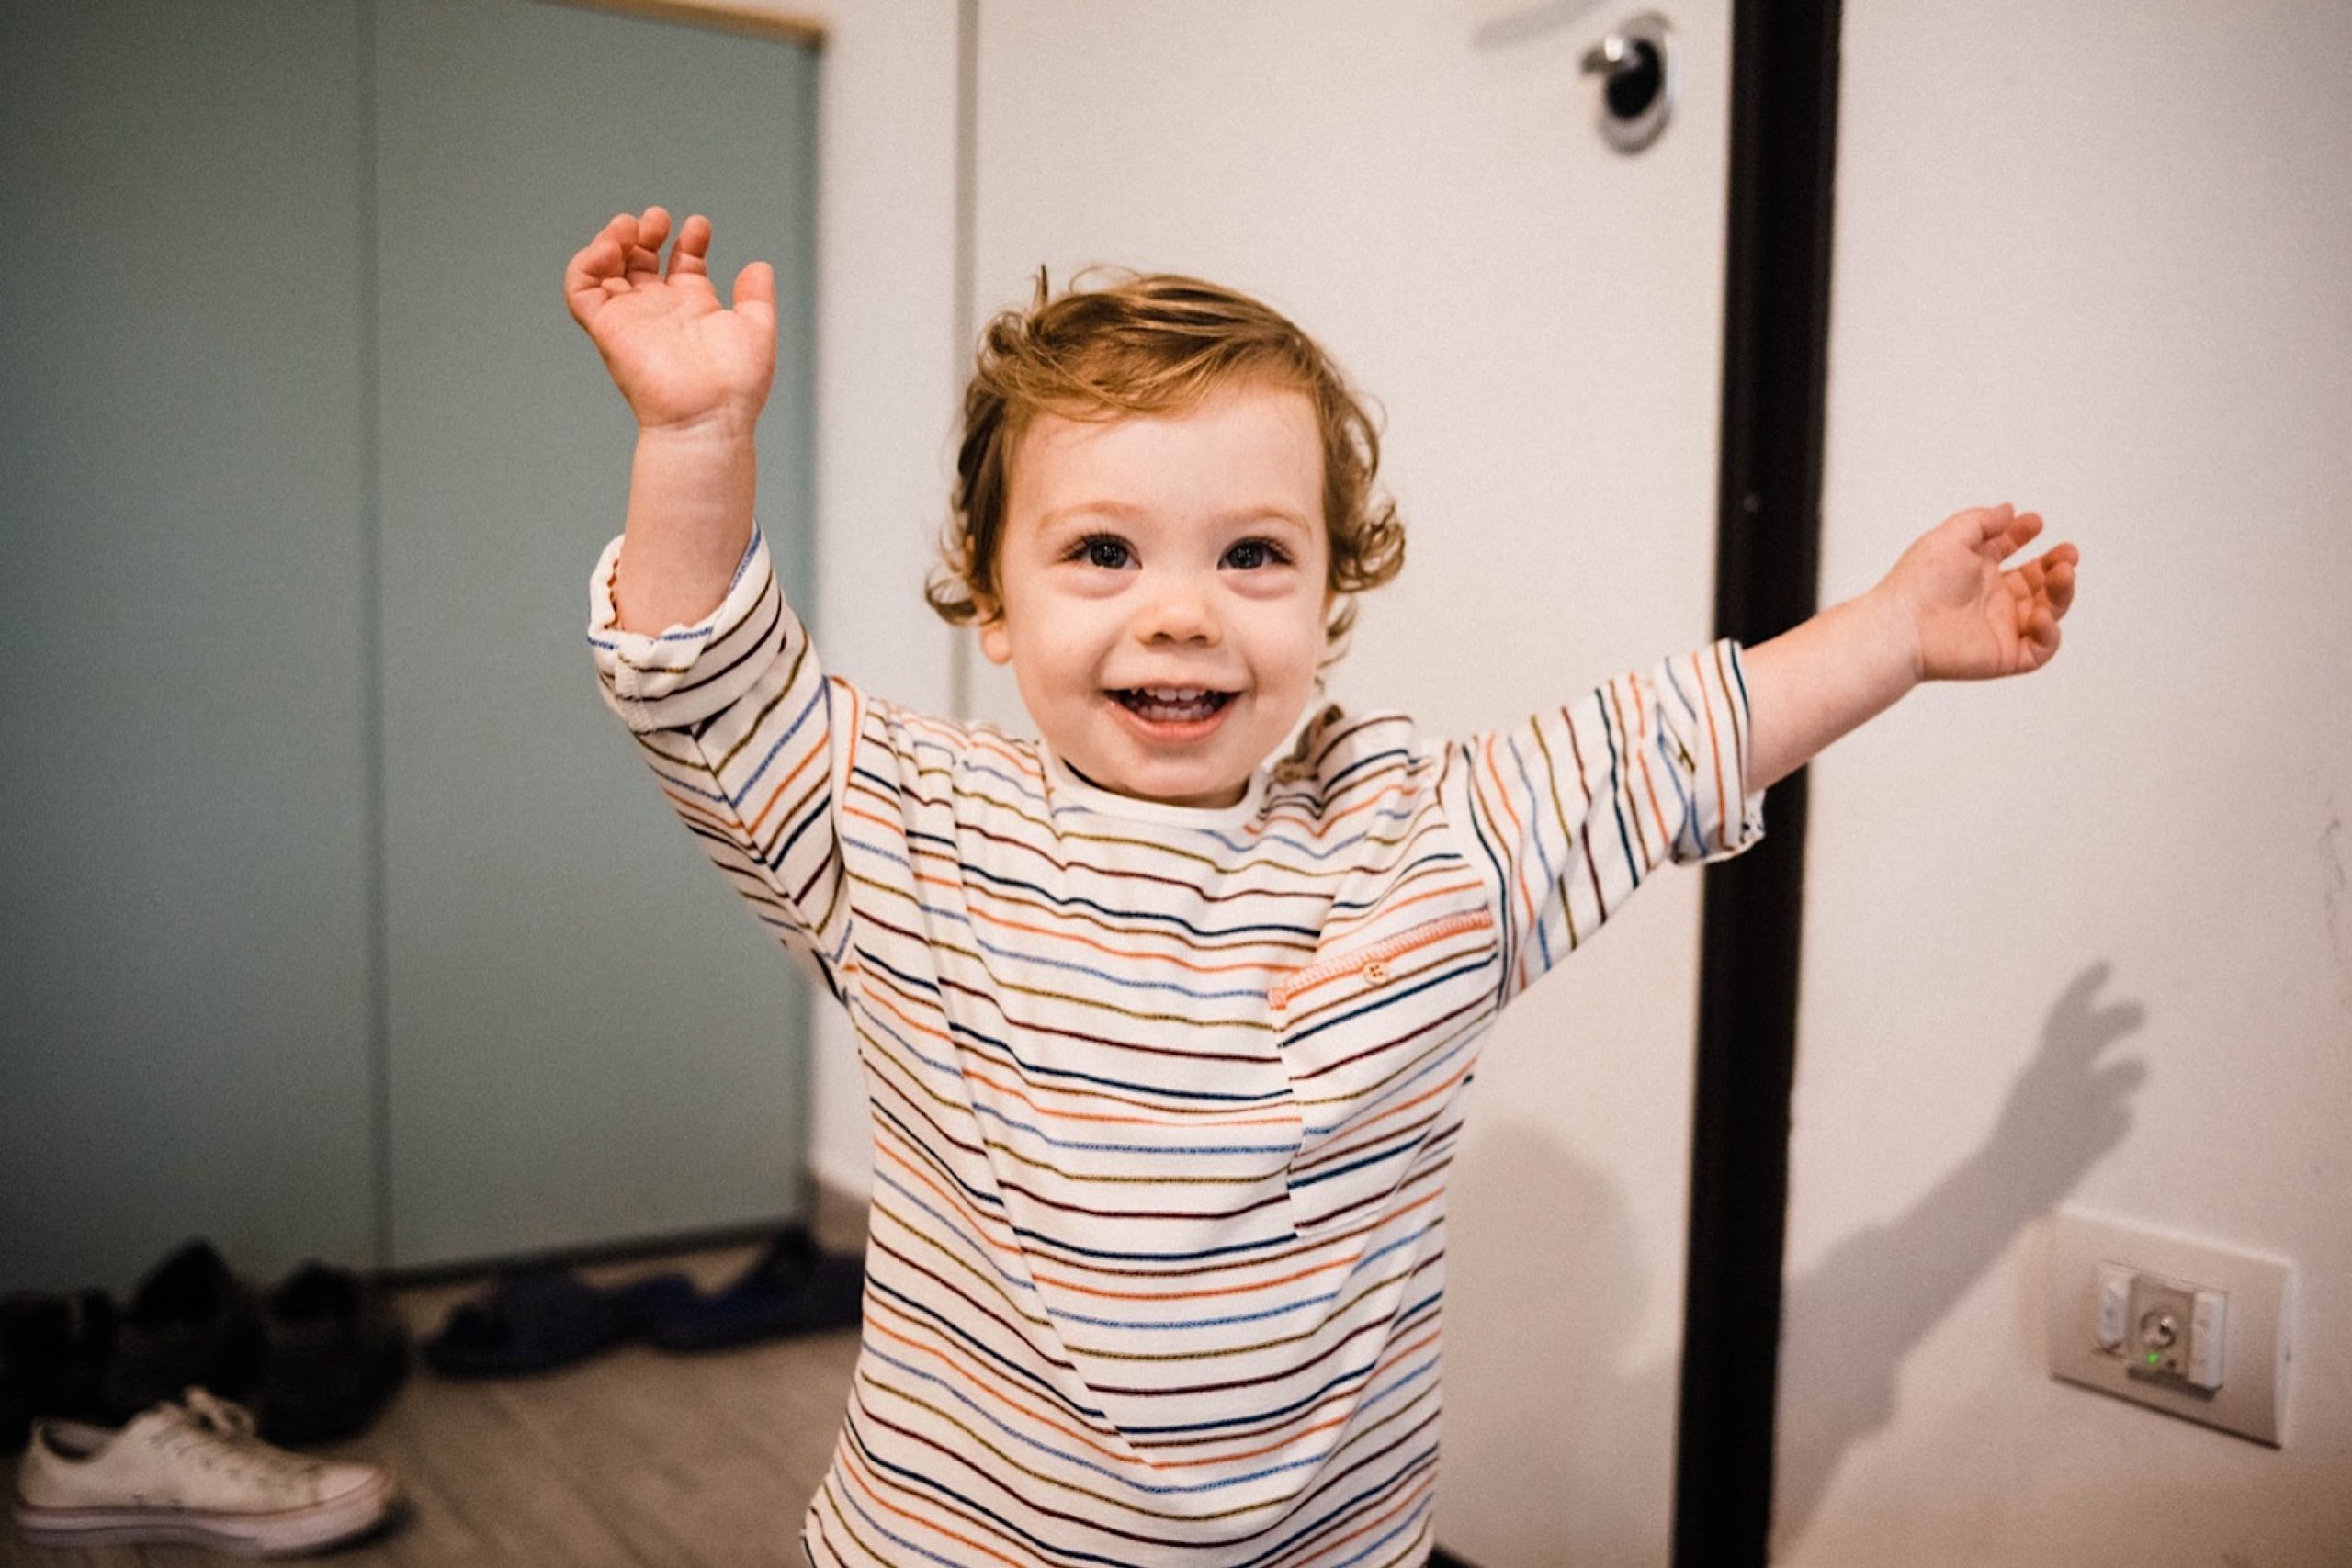 A portrait photo of a toddler smiling and cheering during an In-Home Family Photography session in Milan.